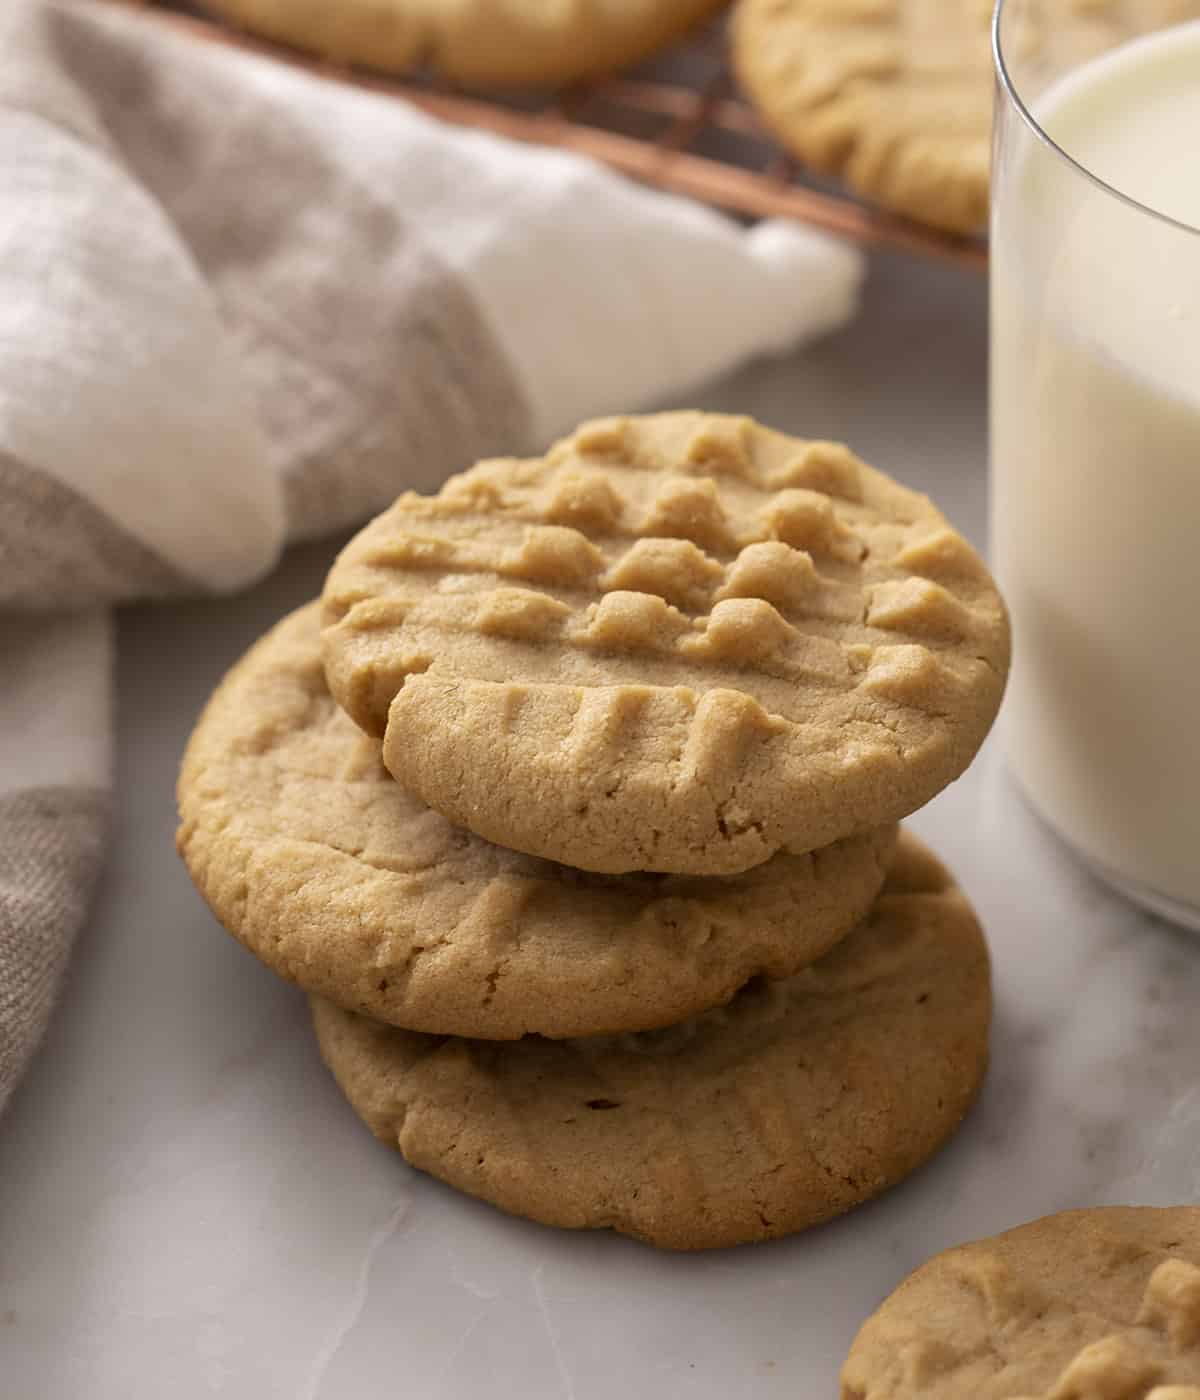 Three peanut butter cookies next to a glass of milk.